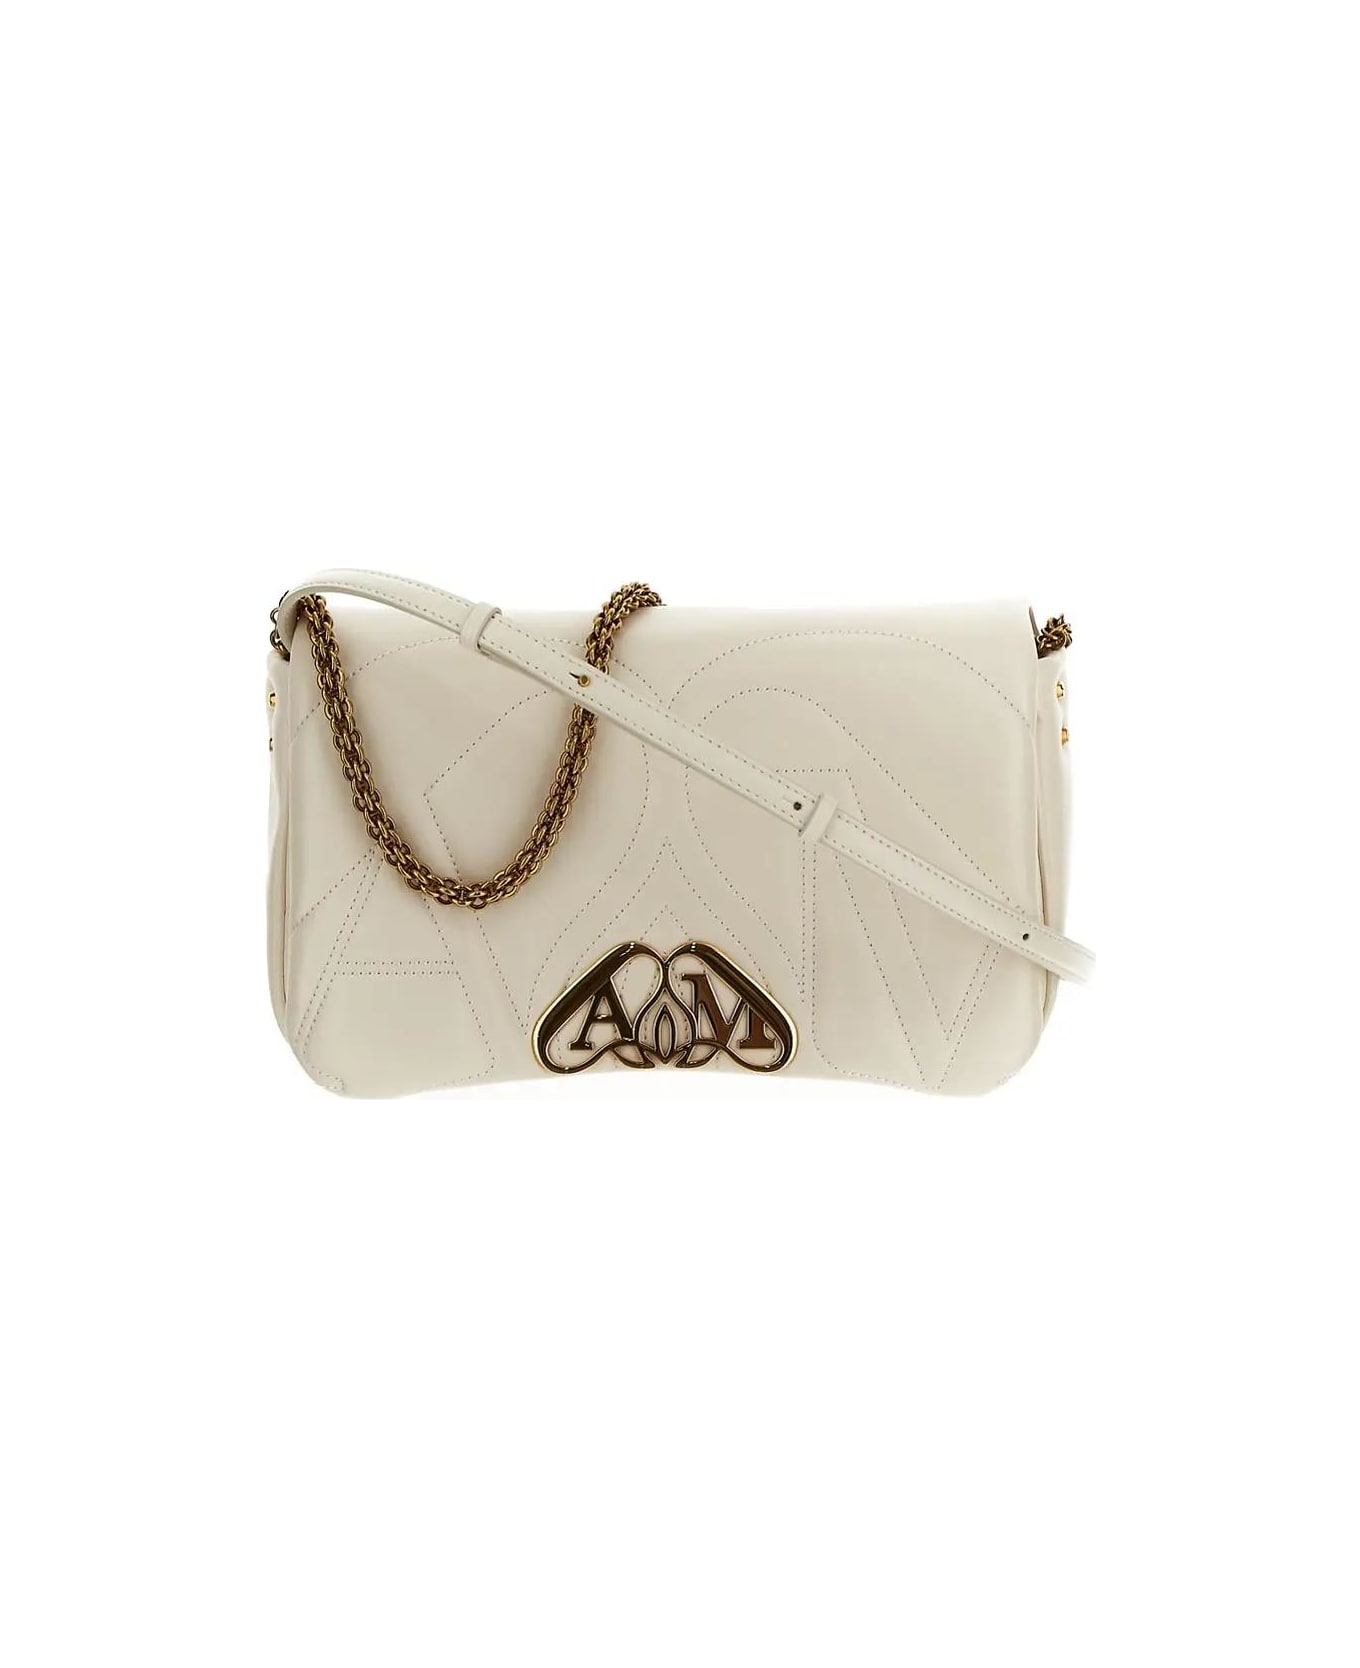 Alexander McQueen The Seal Bag - White ショルダーバッグ